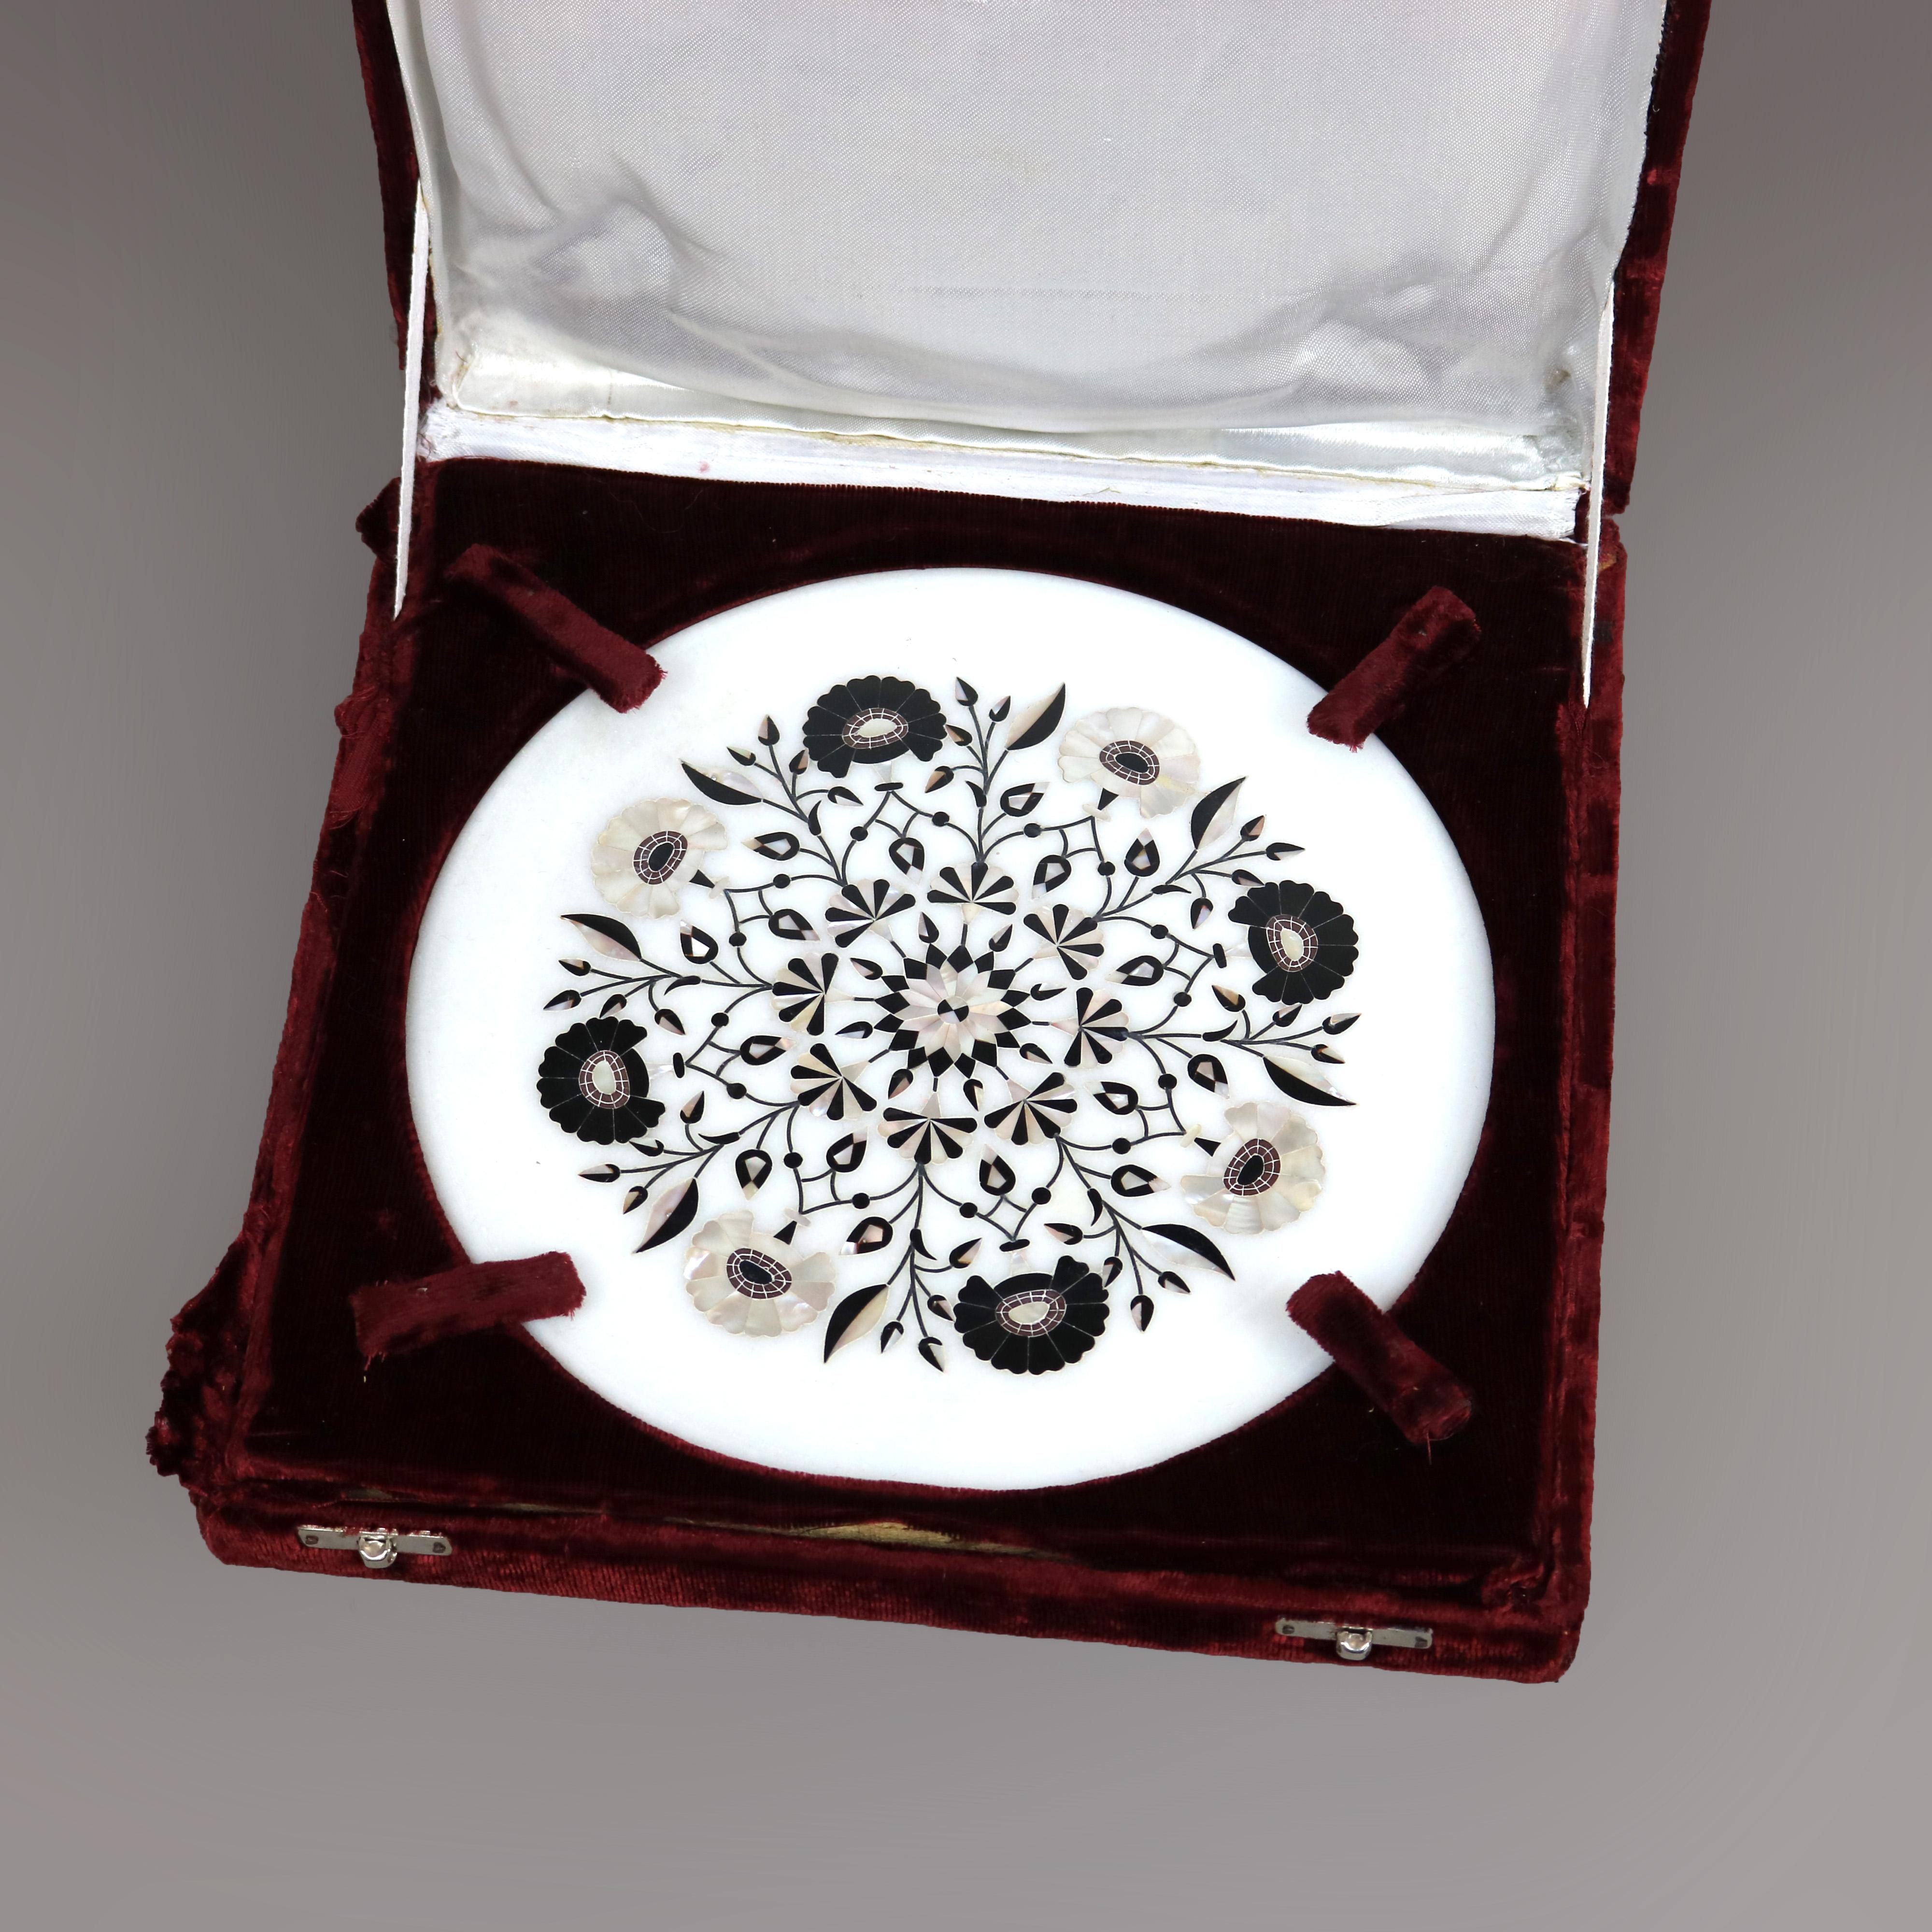 20th Century Carved Marble, Mother of Pearl & Ebony Presentation Plate & Box, c1940